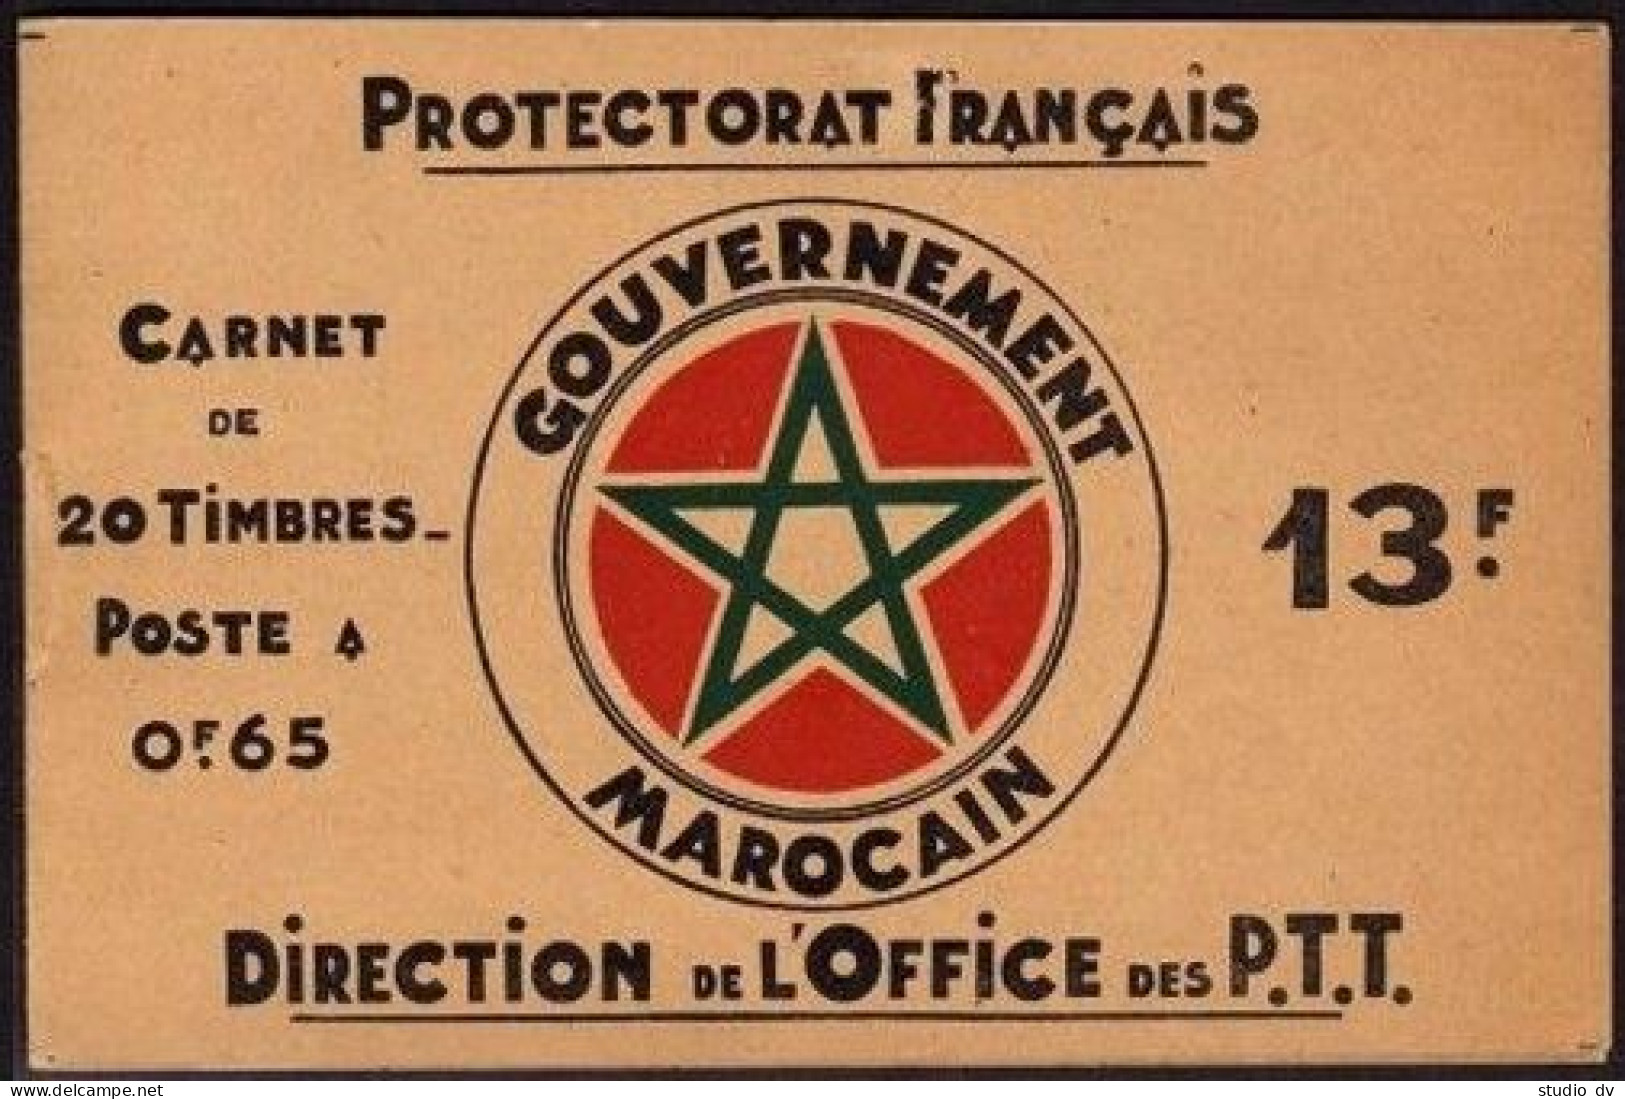 Fr Morocco 136b Booklet, MNH. Michel 105 MH. Kasbah Of The Oudayas Rabat, 1933. - Morocco (1956-...)